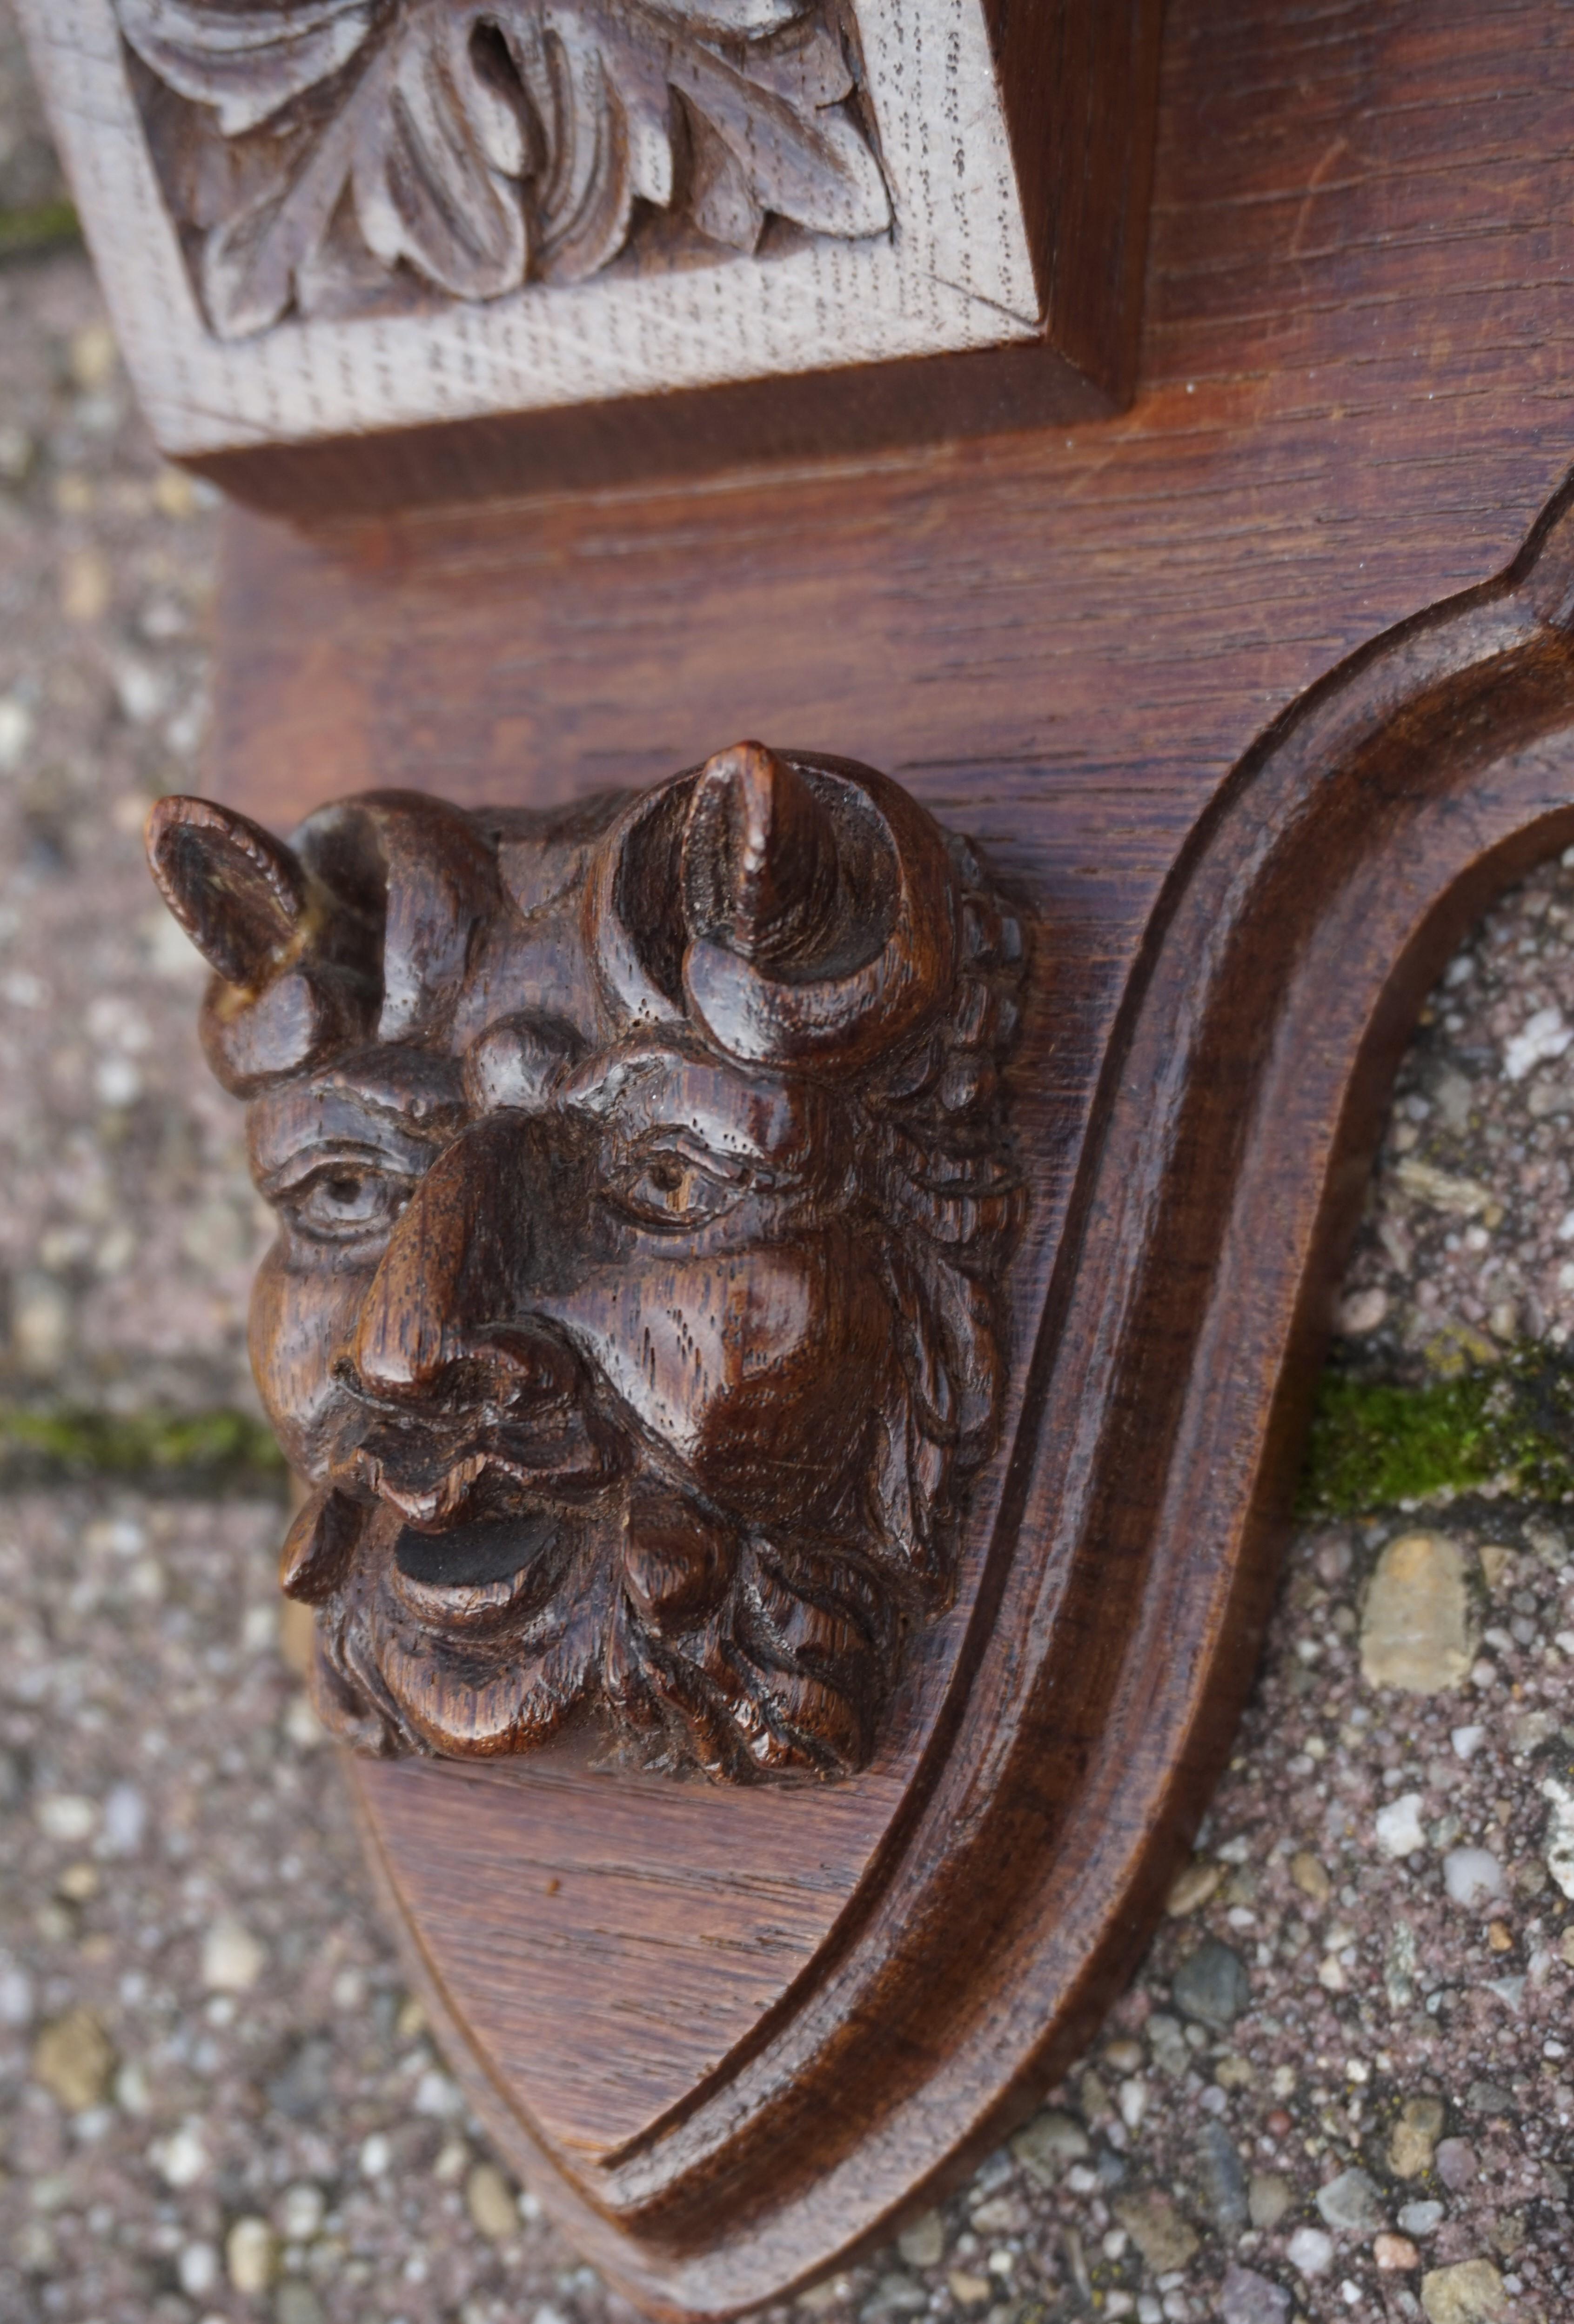 Renaissance Revival Very Large Hand Carved Oak Wall Coat Rack with Lion & Grotesque Mask Sculptures